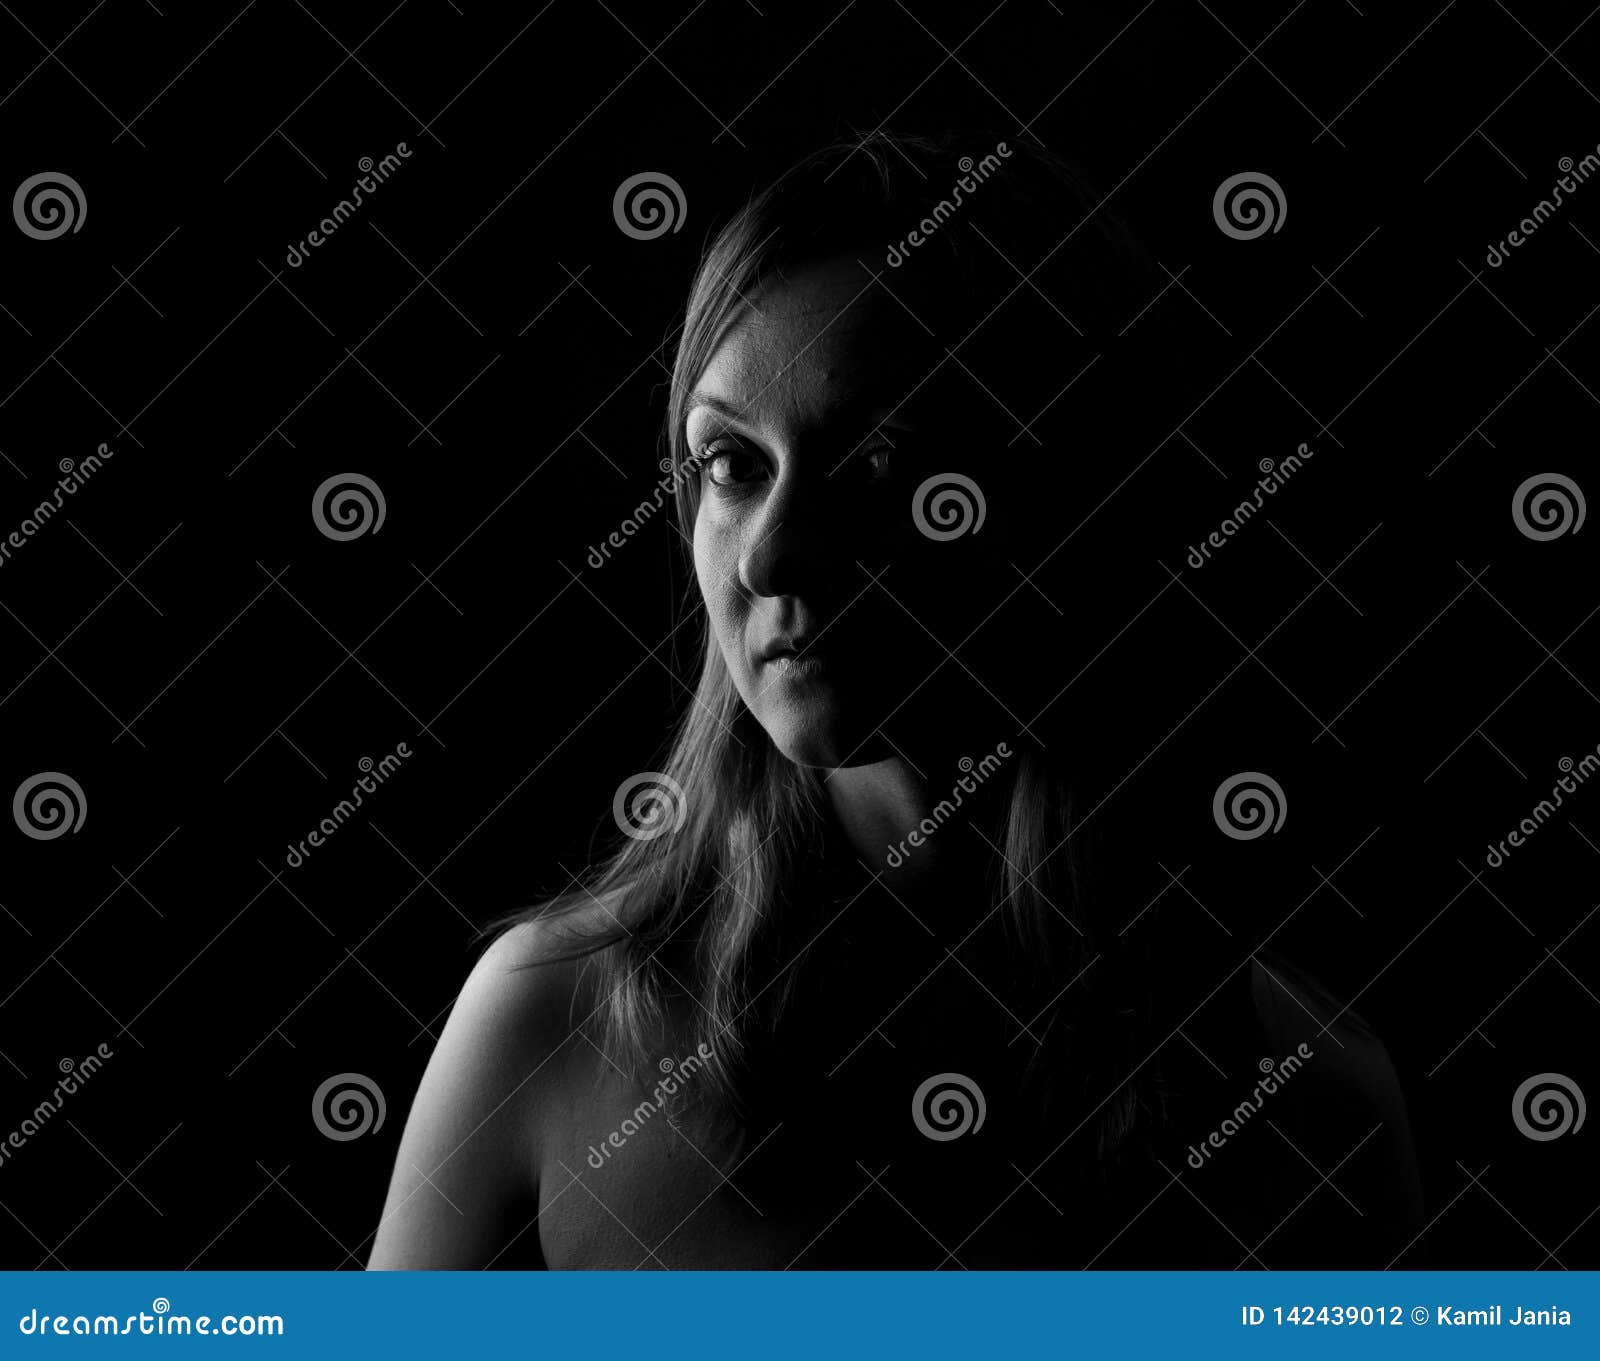 young woman showing expresion black & white 